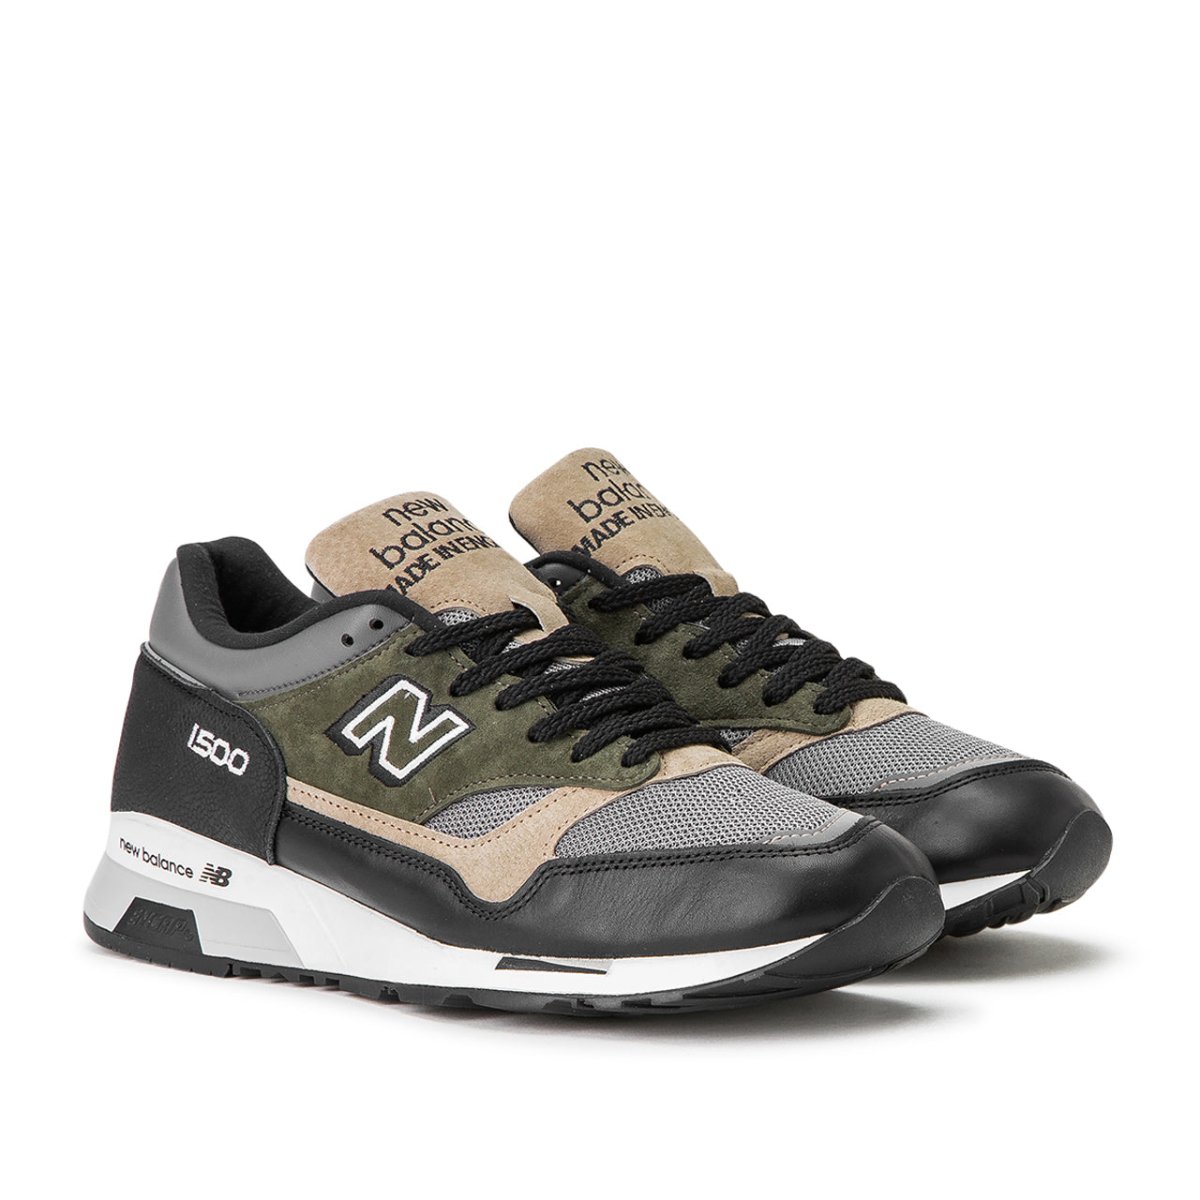 New Balance M1500 FDS 'Made in England' (Schwarz / Olive)  - Allike Store